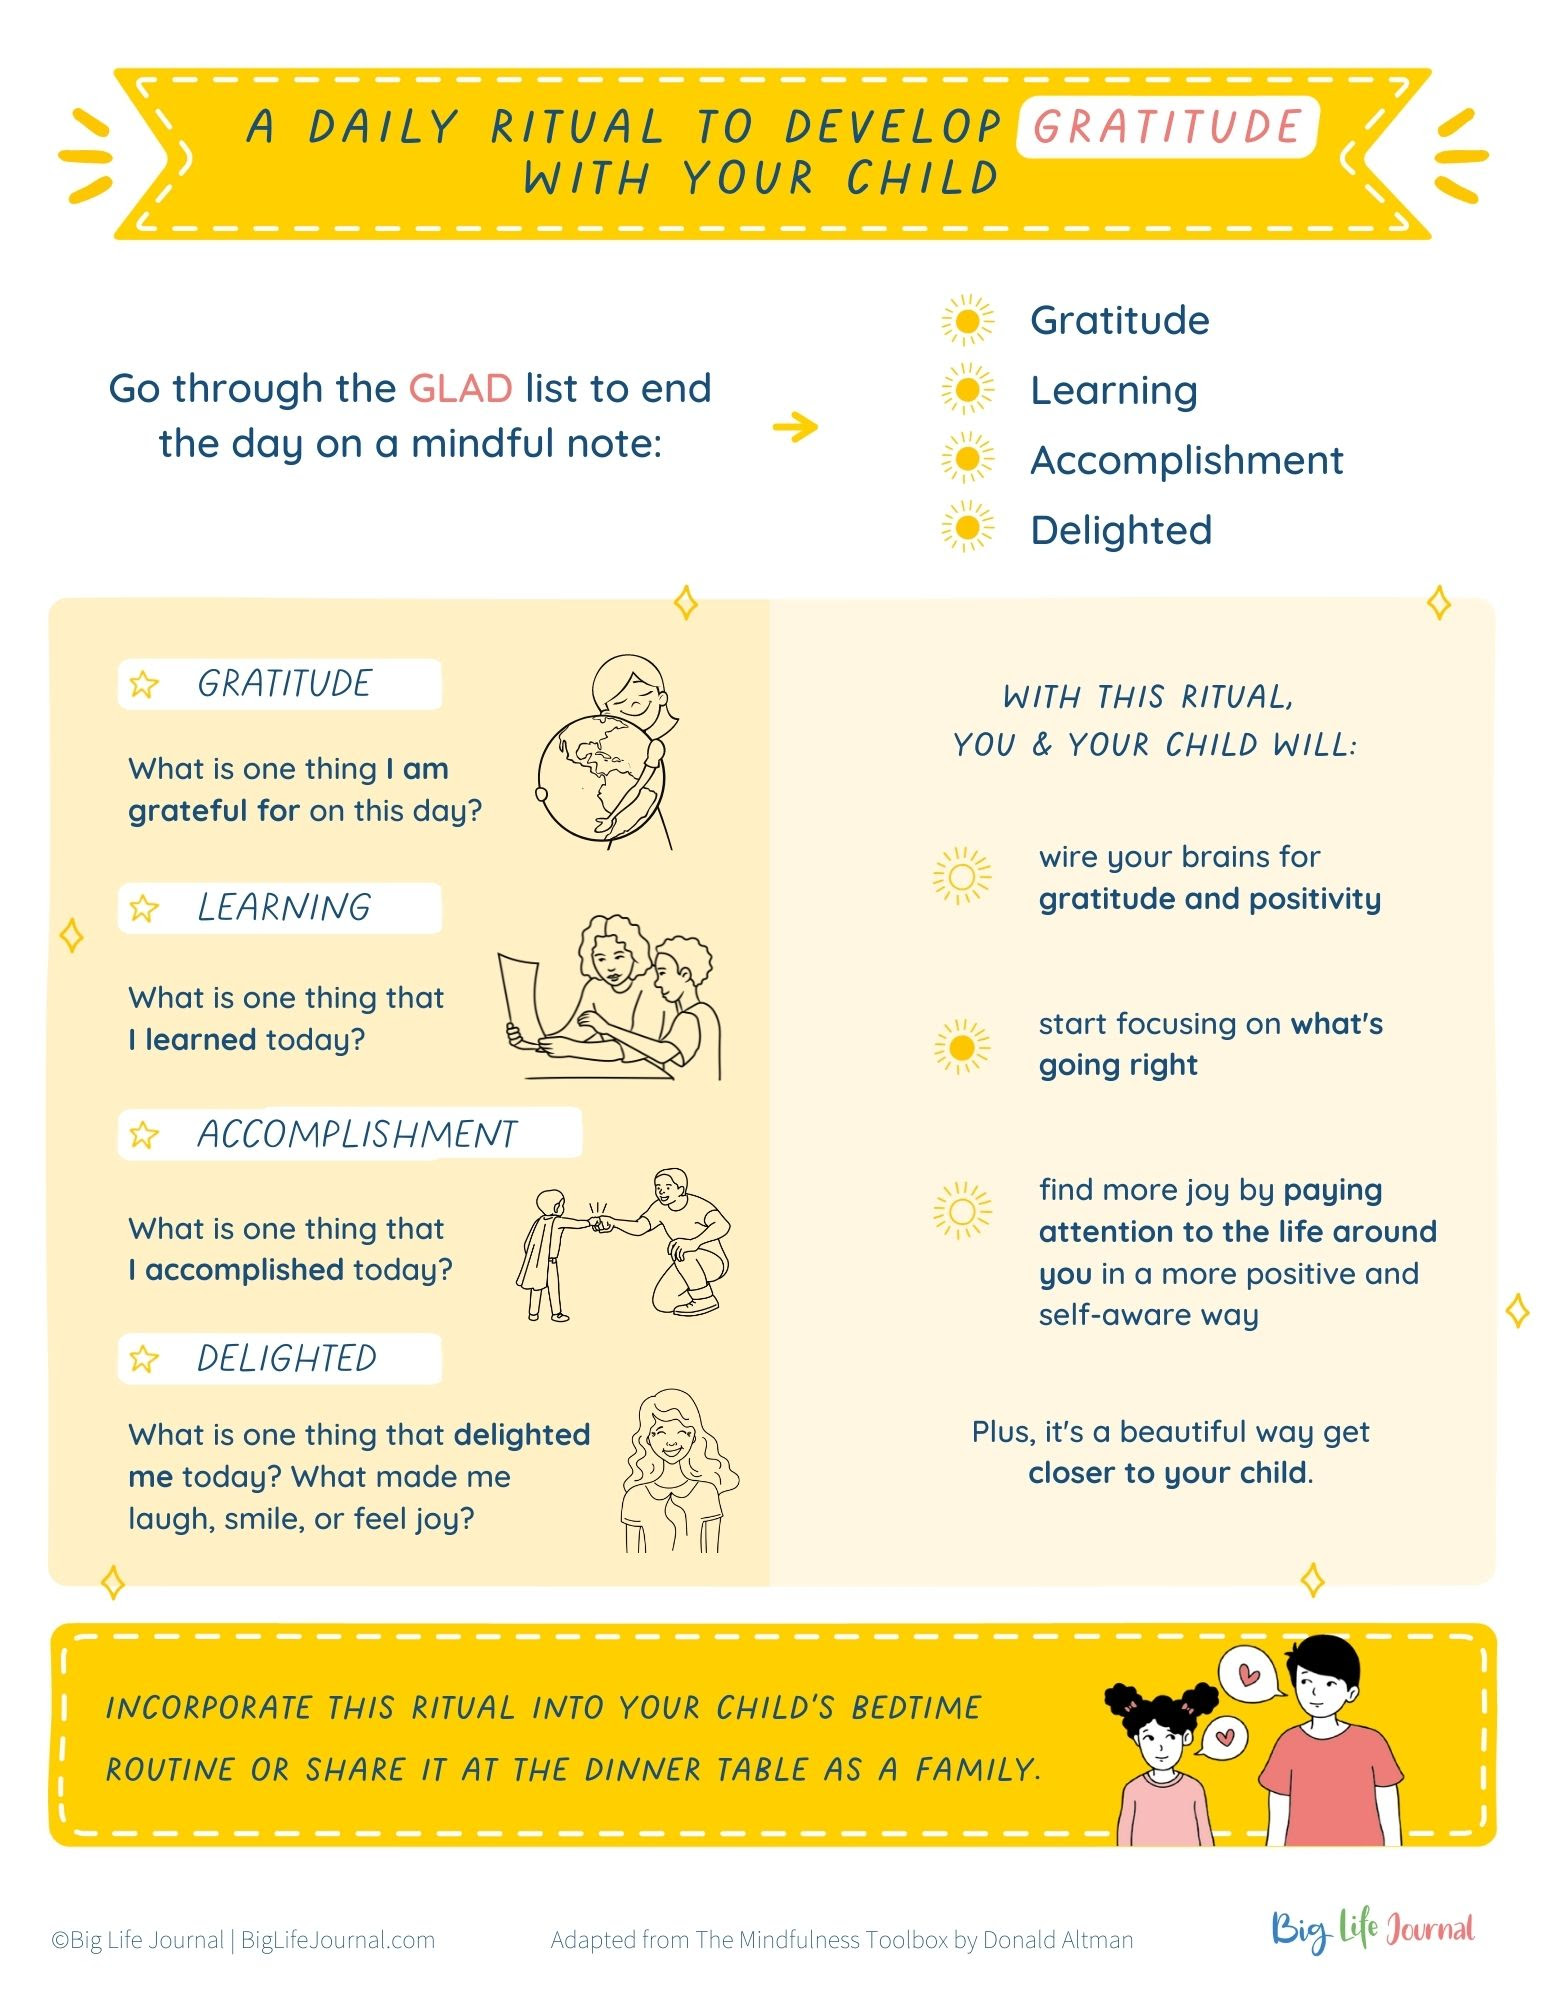 A daily ritual to develop with your child